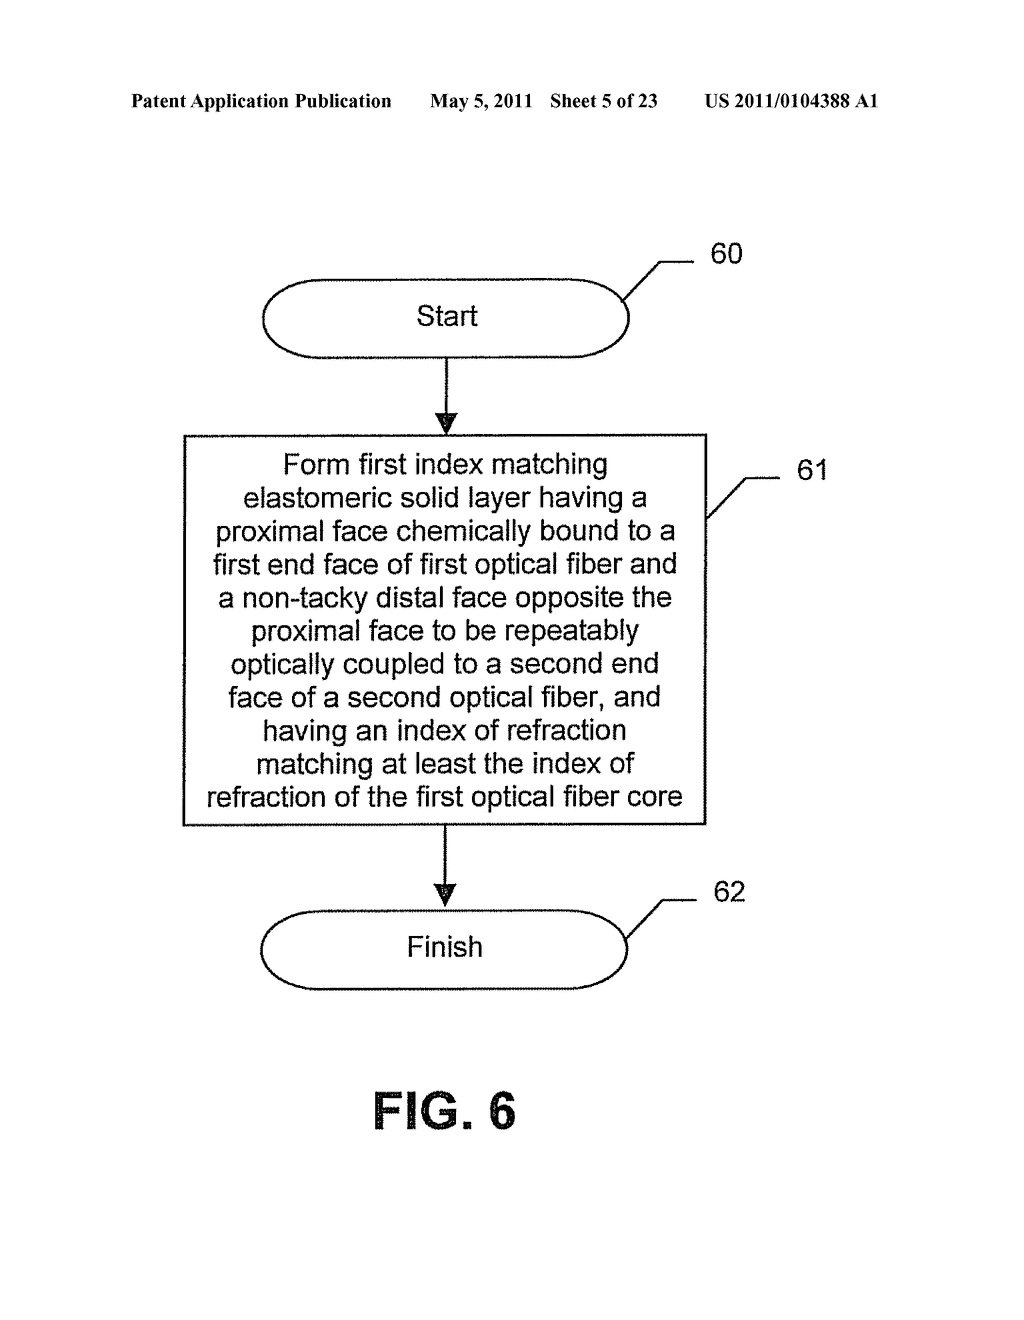 METHOD FOR MAKING AN OPTICAL DEVICE INCLUDING A CURABLE INDEX MATCHING ELASTOMERIC SOLID LAYER - diagram, schematic, and image 06